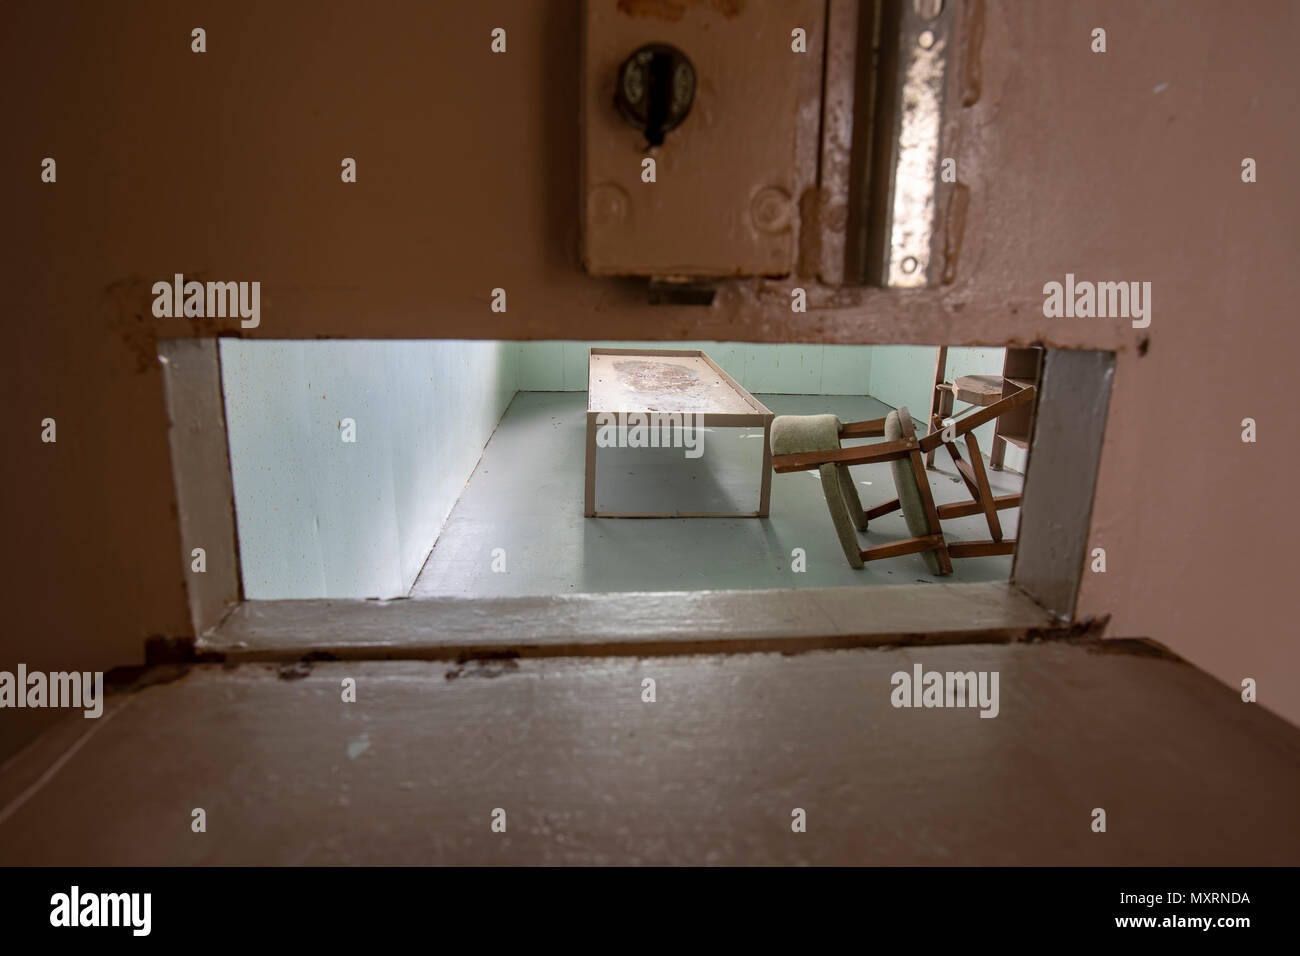 Metal bed frame with chair and desk inside solitary confinement cell through metal door slat in old prison. Stock Photo